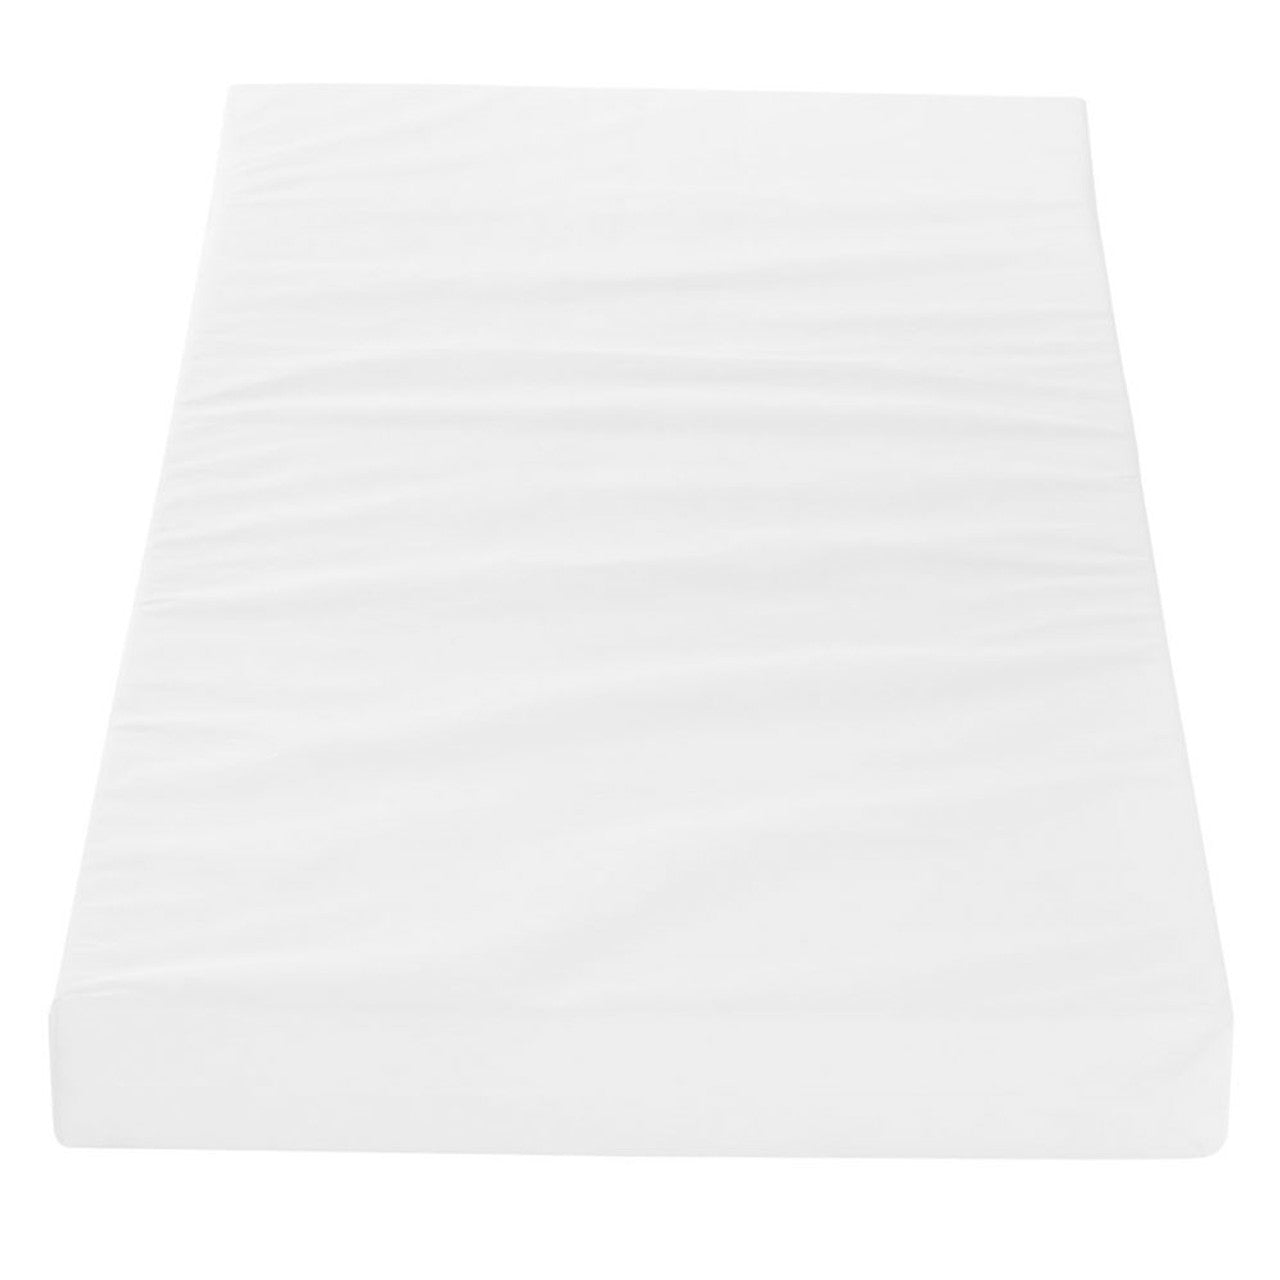 Tutti Bambini Eco Fibre Deluxe Cot Bed Mattress (70 x 140 cm) - For Your Little One